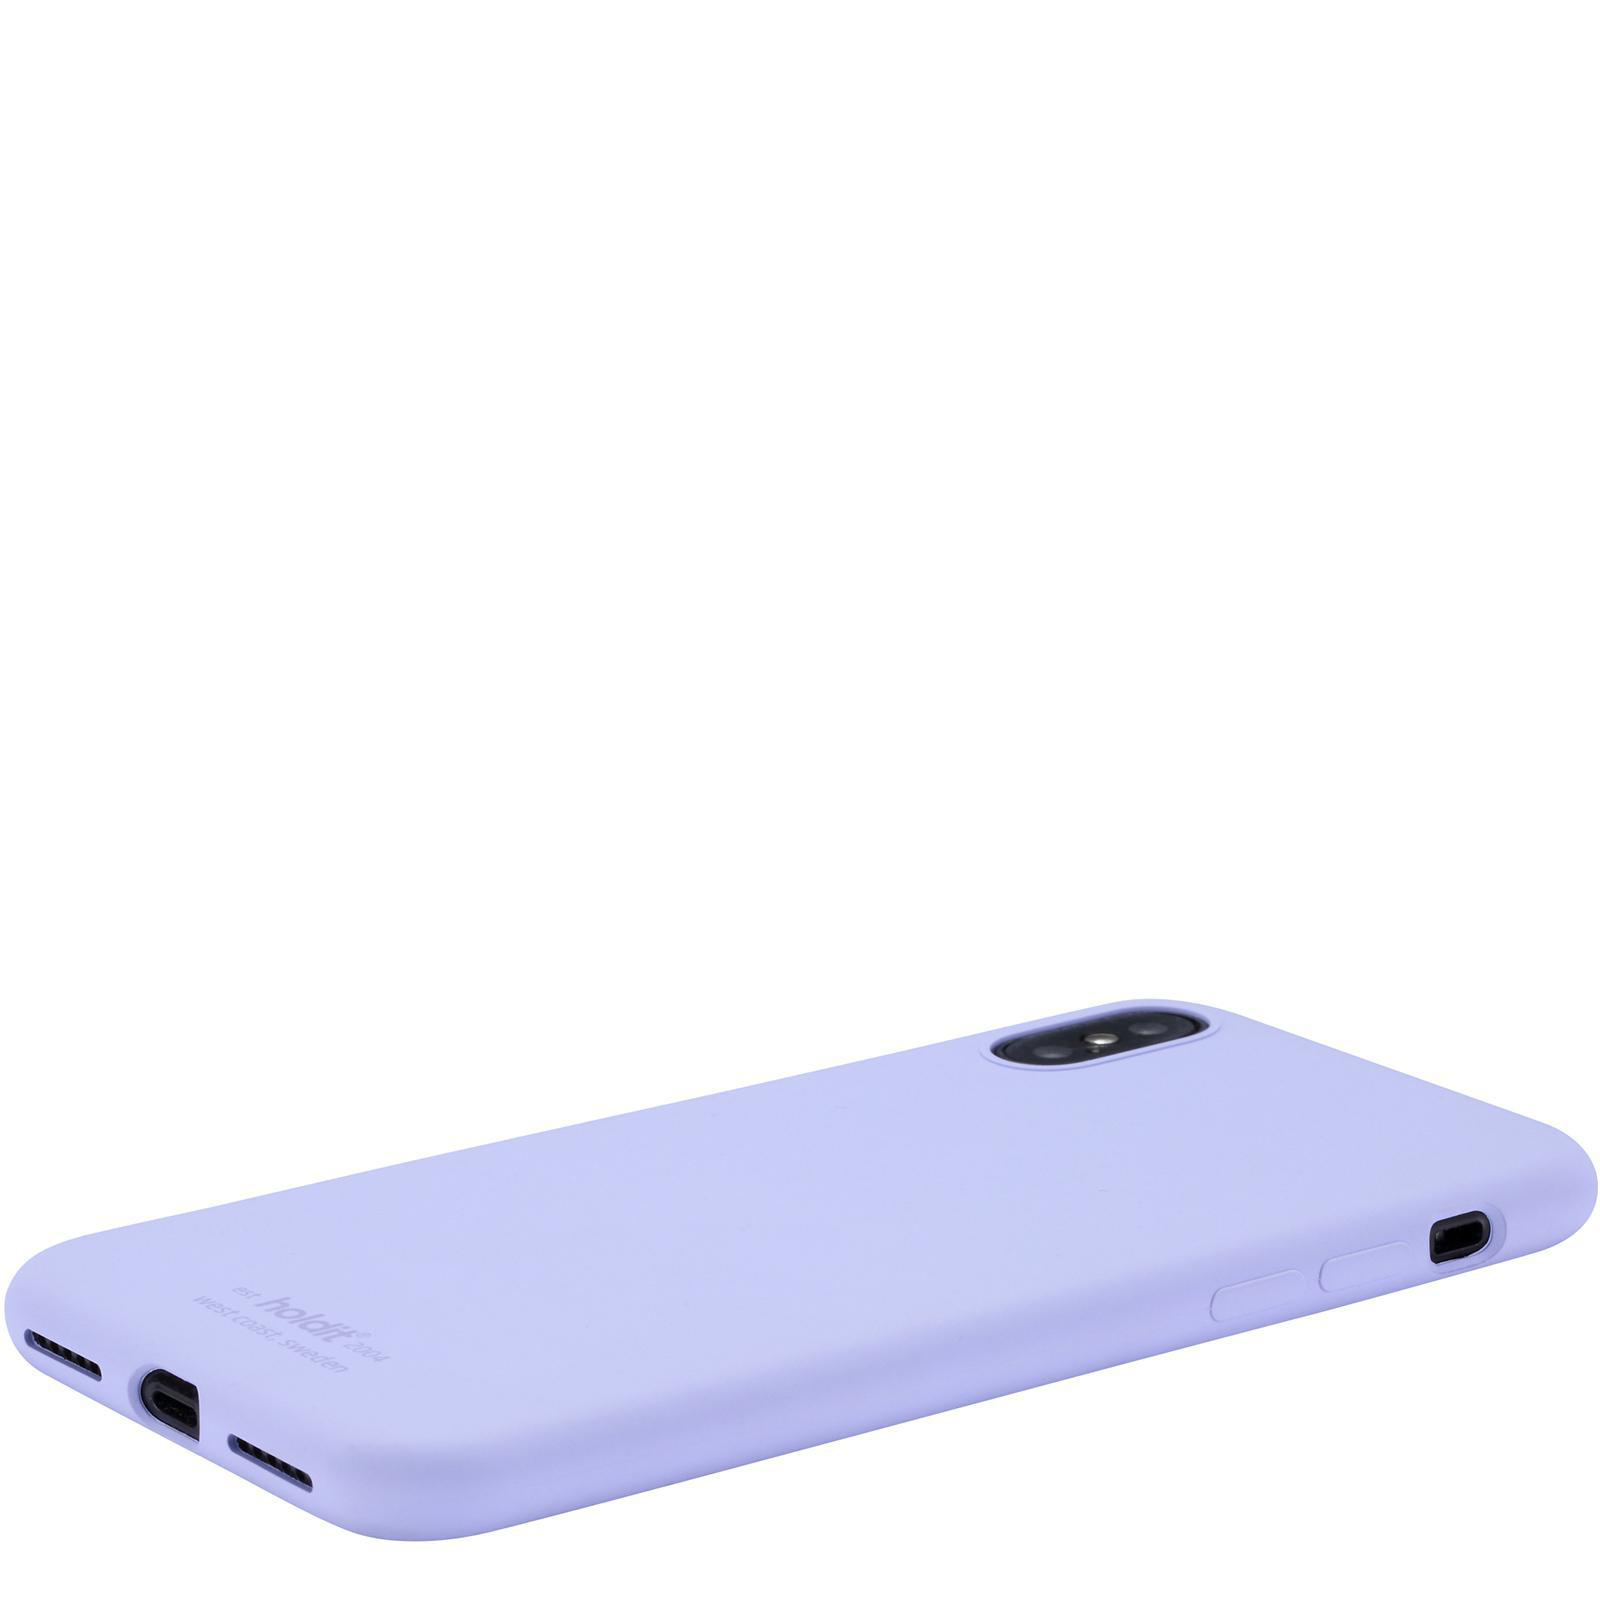 Backcover, HOLDIT Apple, , XS iPhone Lavendel Silicone, X,